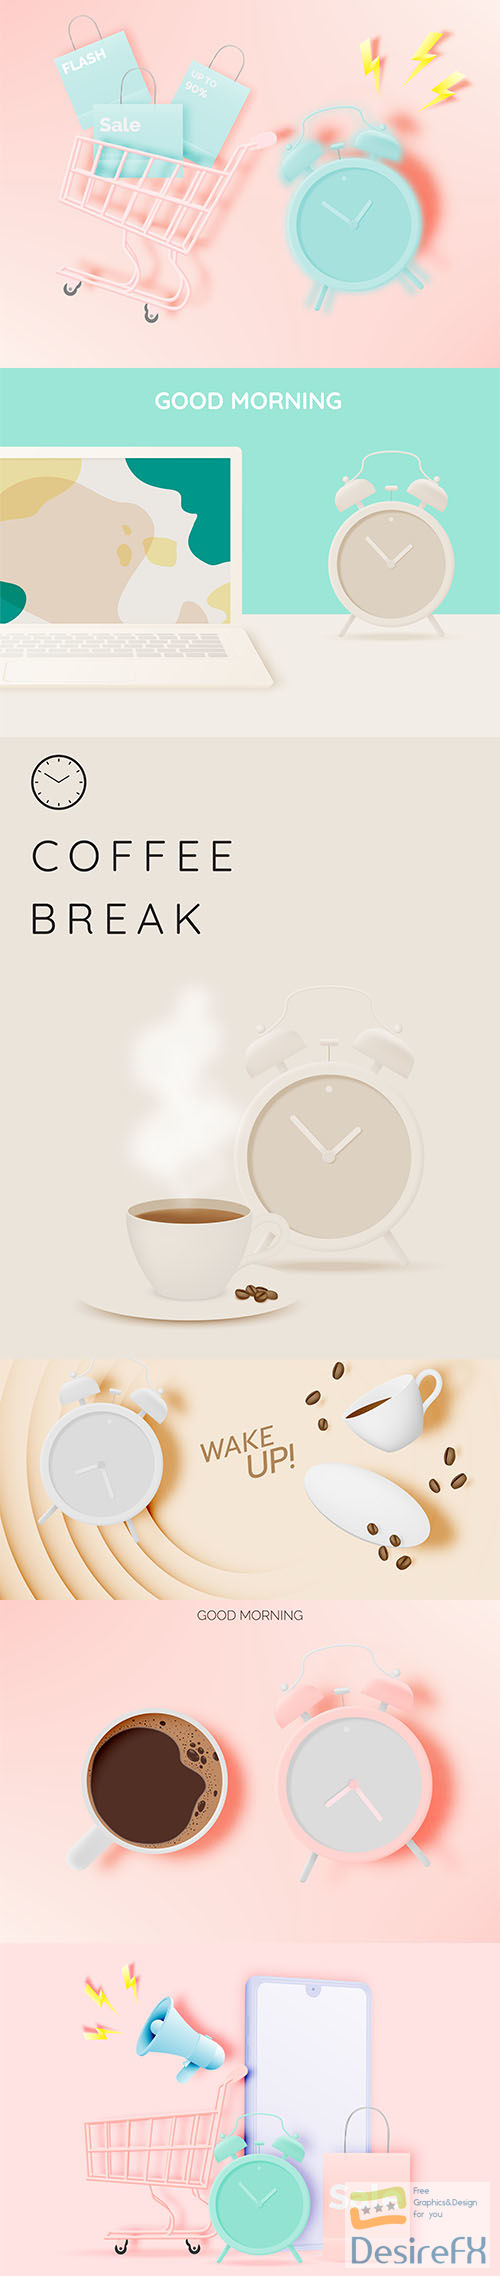 Coffee break background with coffee cup